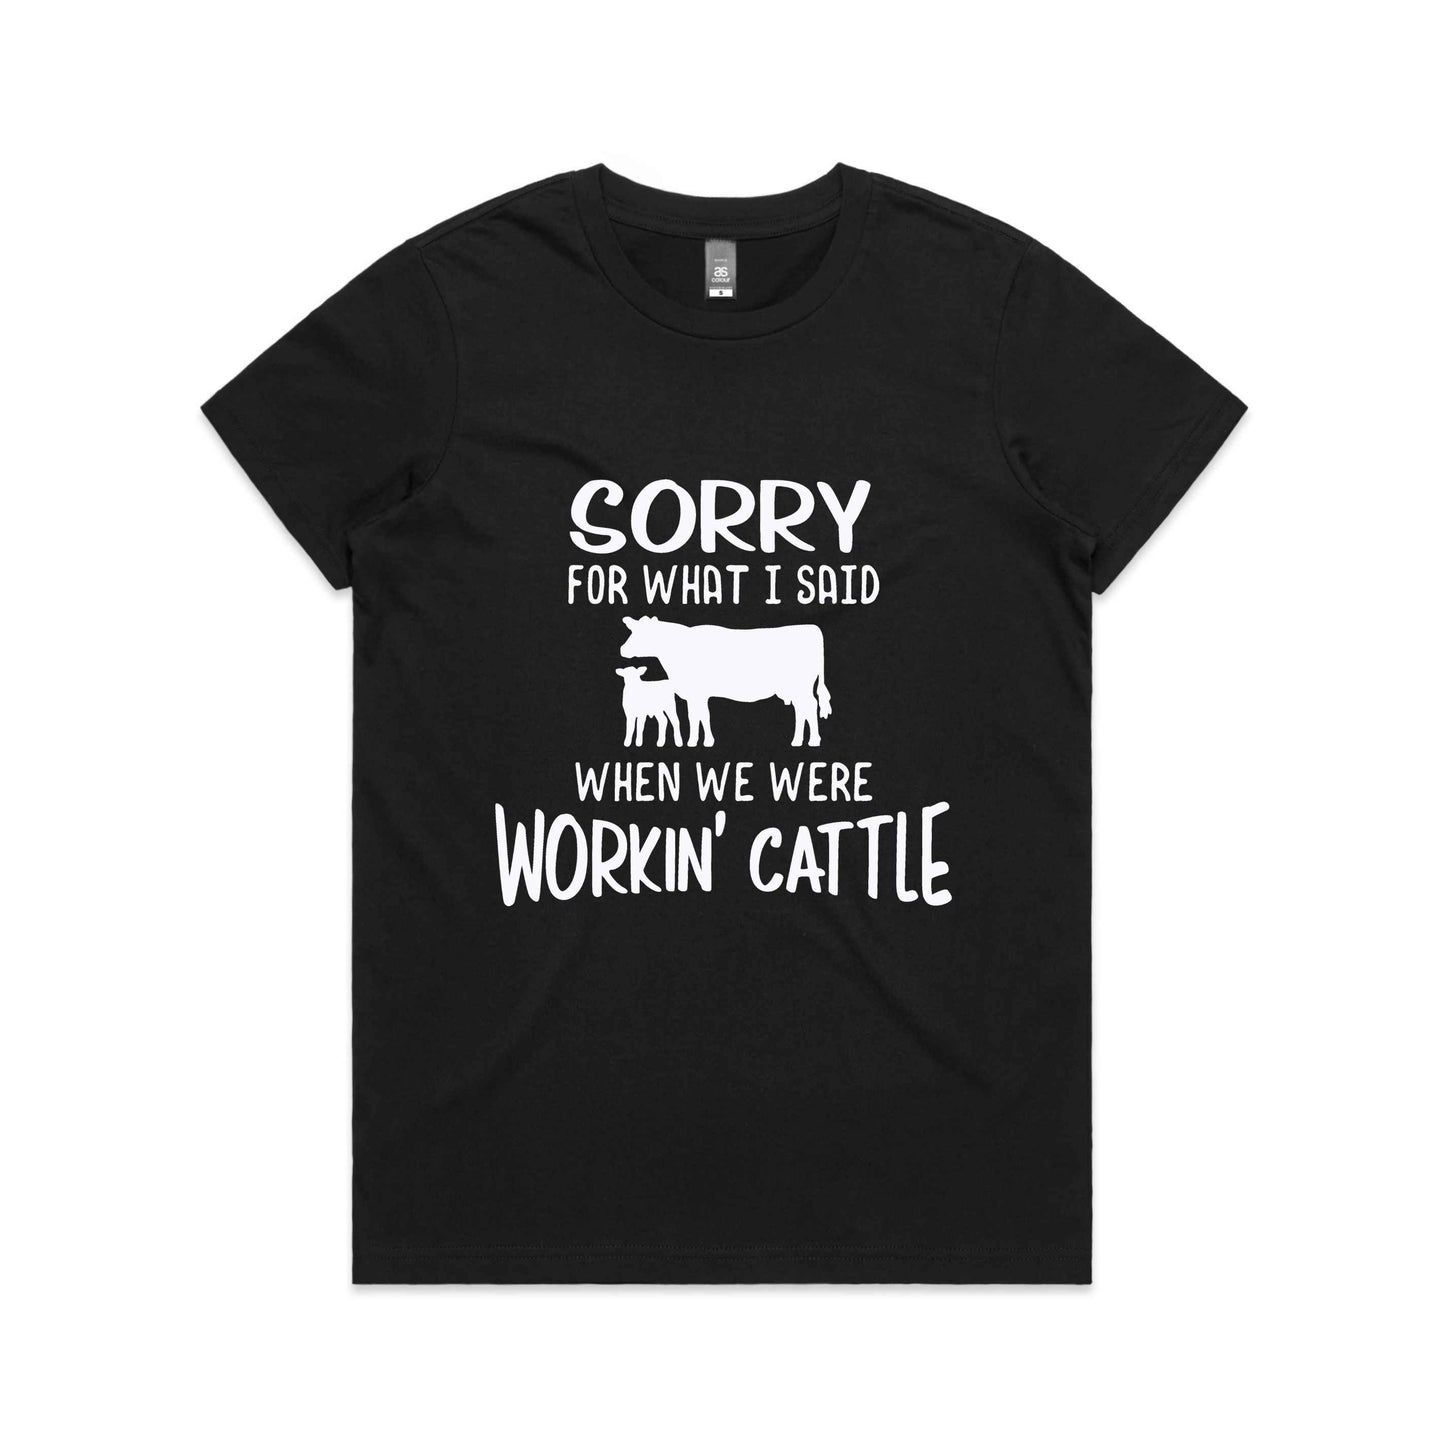 Hayco Women's Sorry for What I said Workin' Cattle Shirt